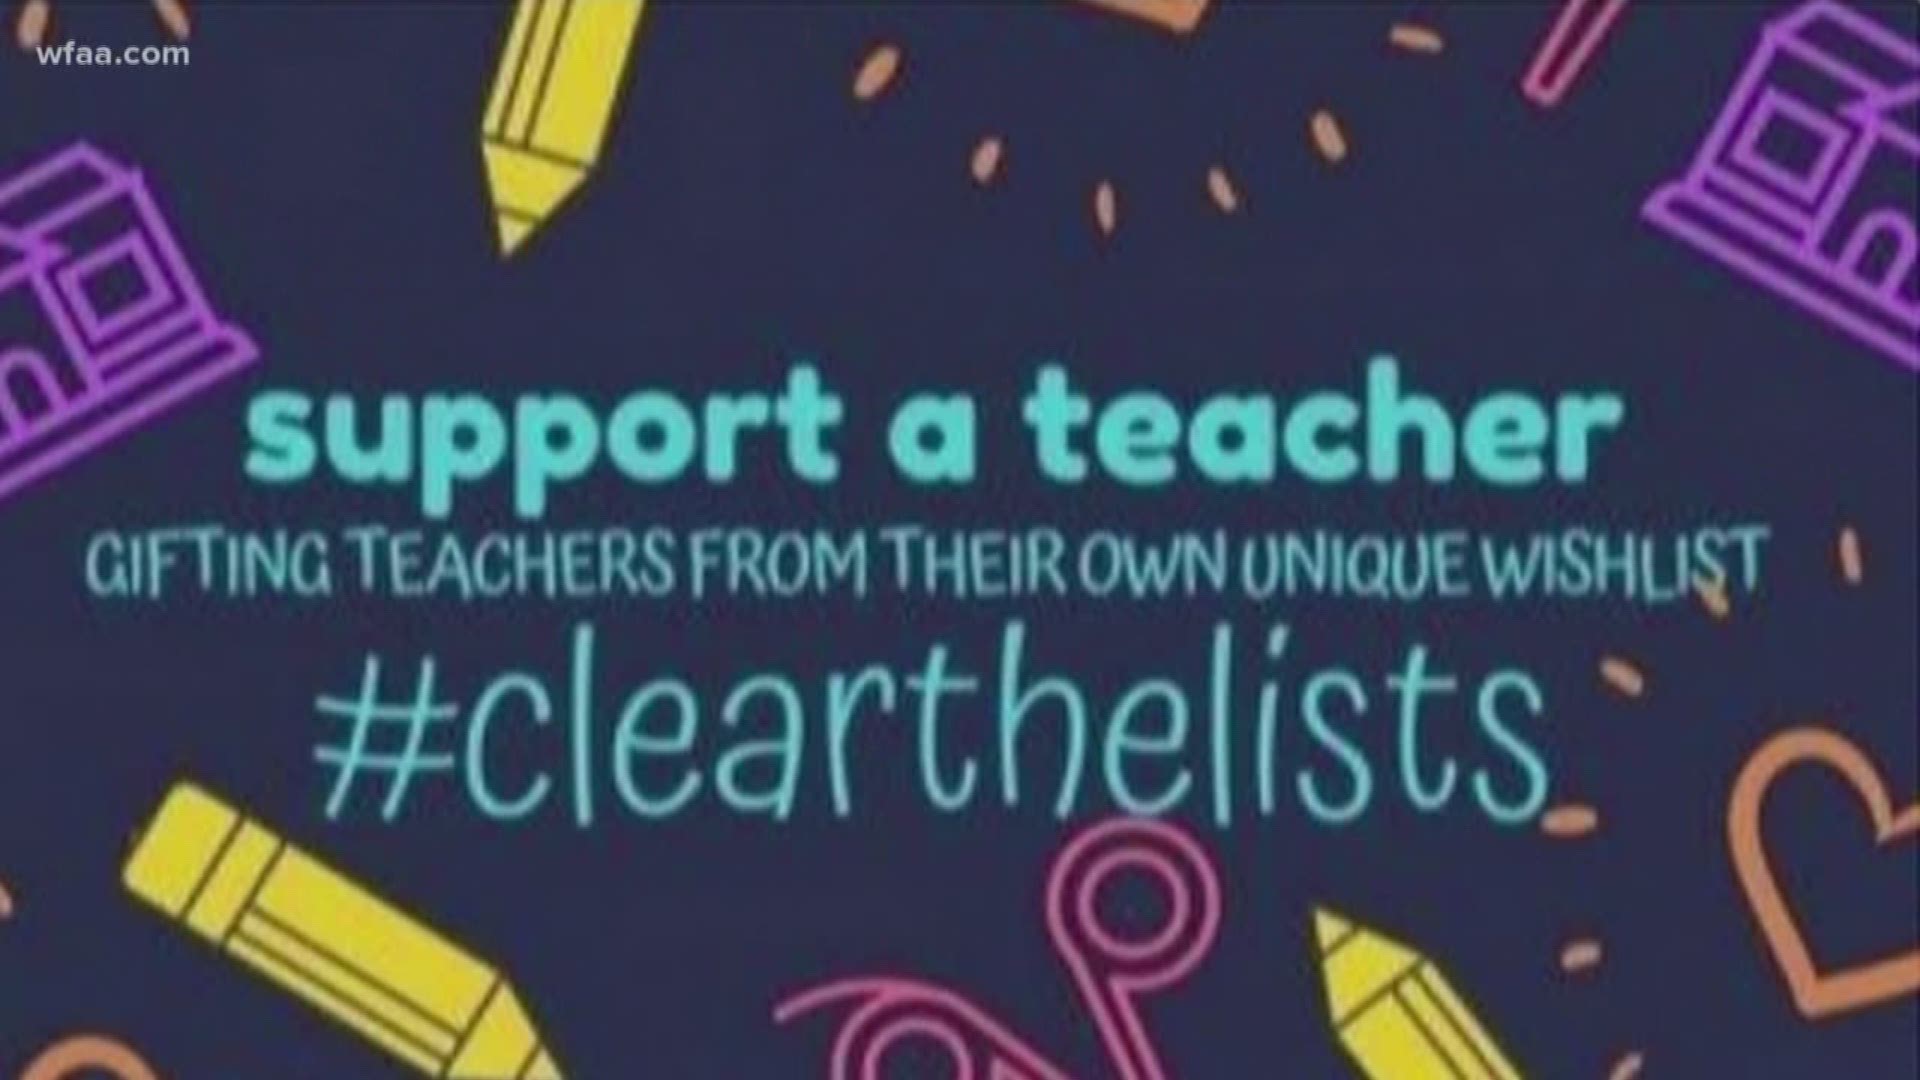 Teachers are relying on strangers for school supplies through a viral trend on social media. It’s called “Clear the Lists:” Teachers make a list of wanted school supplies on Amazon.com. Then anyone – even complete strangers – can go online and buy the items until they’re all gone.